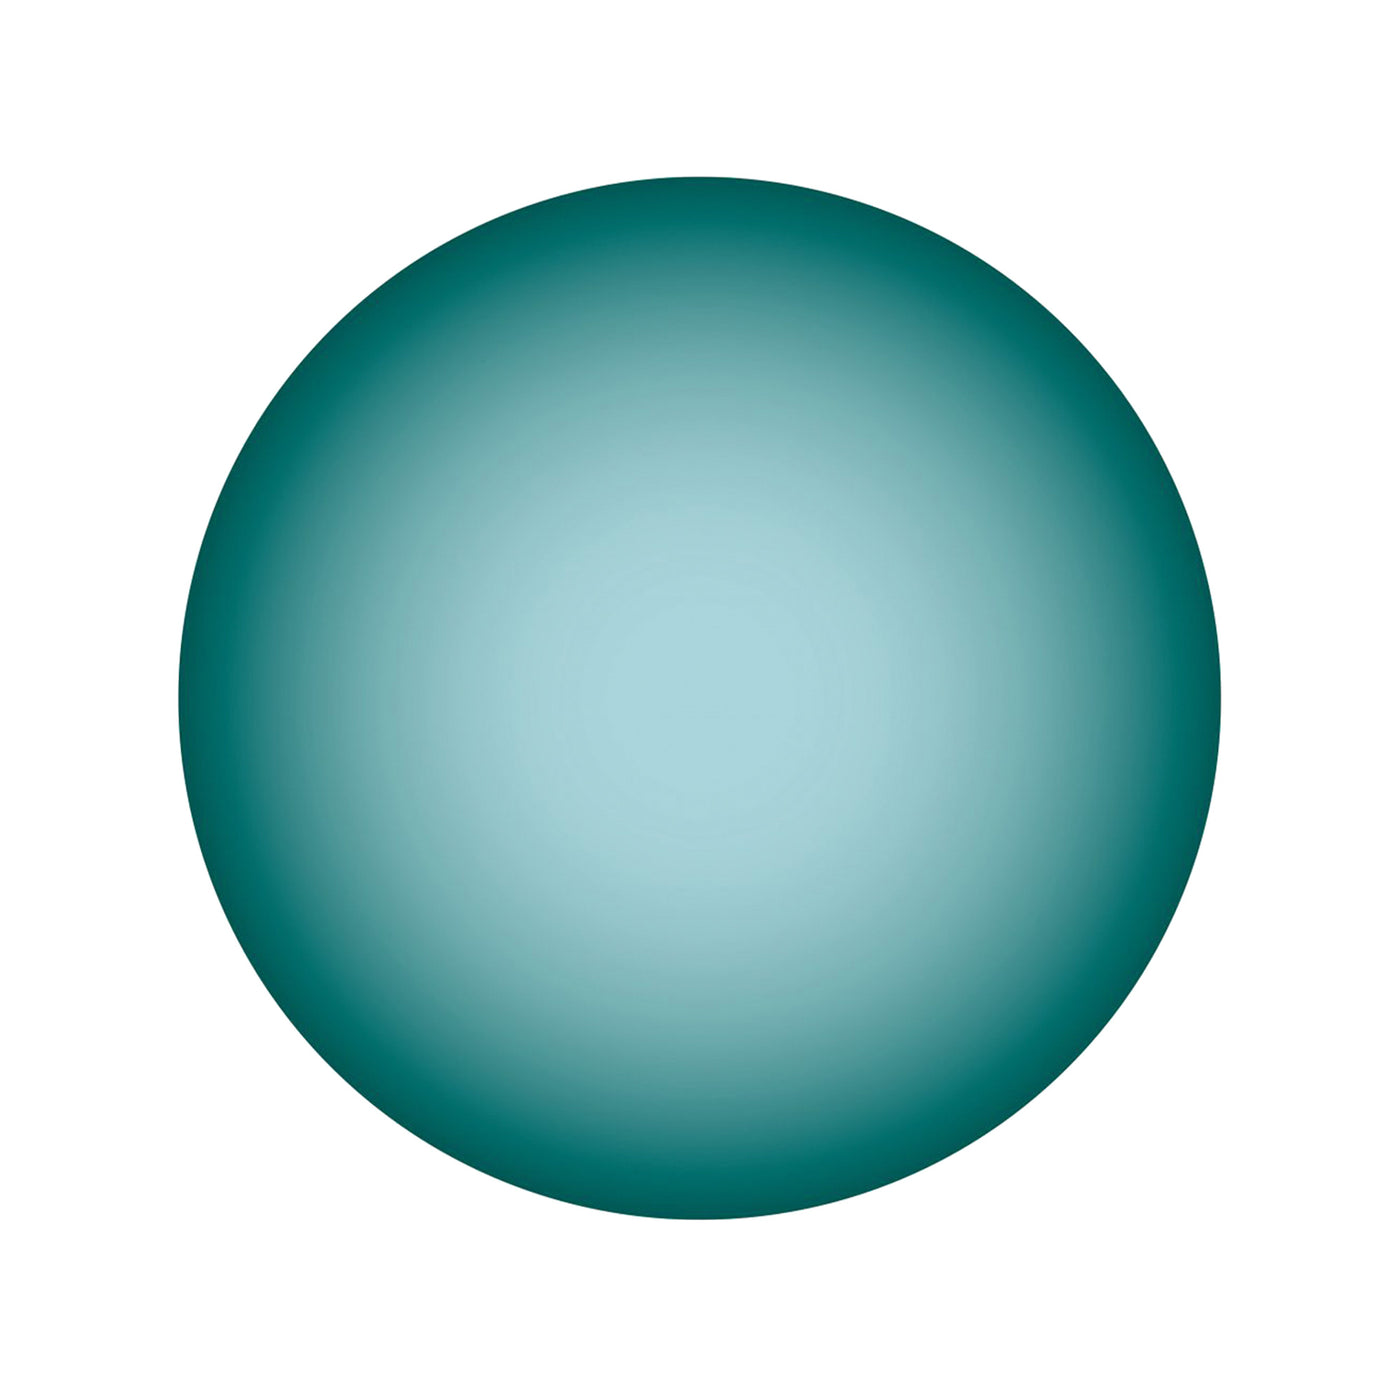 Thermal Green Lacquer Round Placemat from Tisch New York